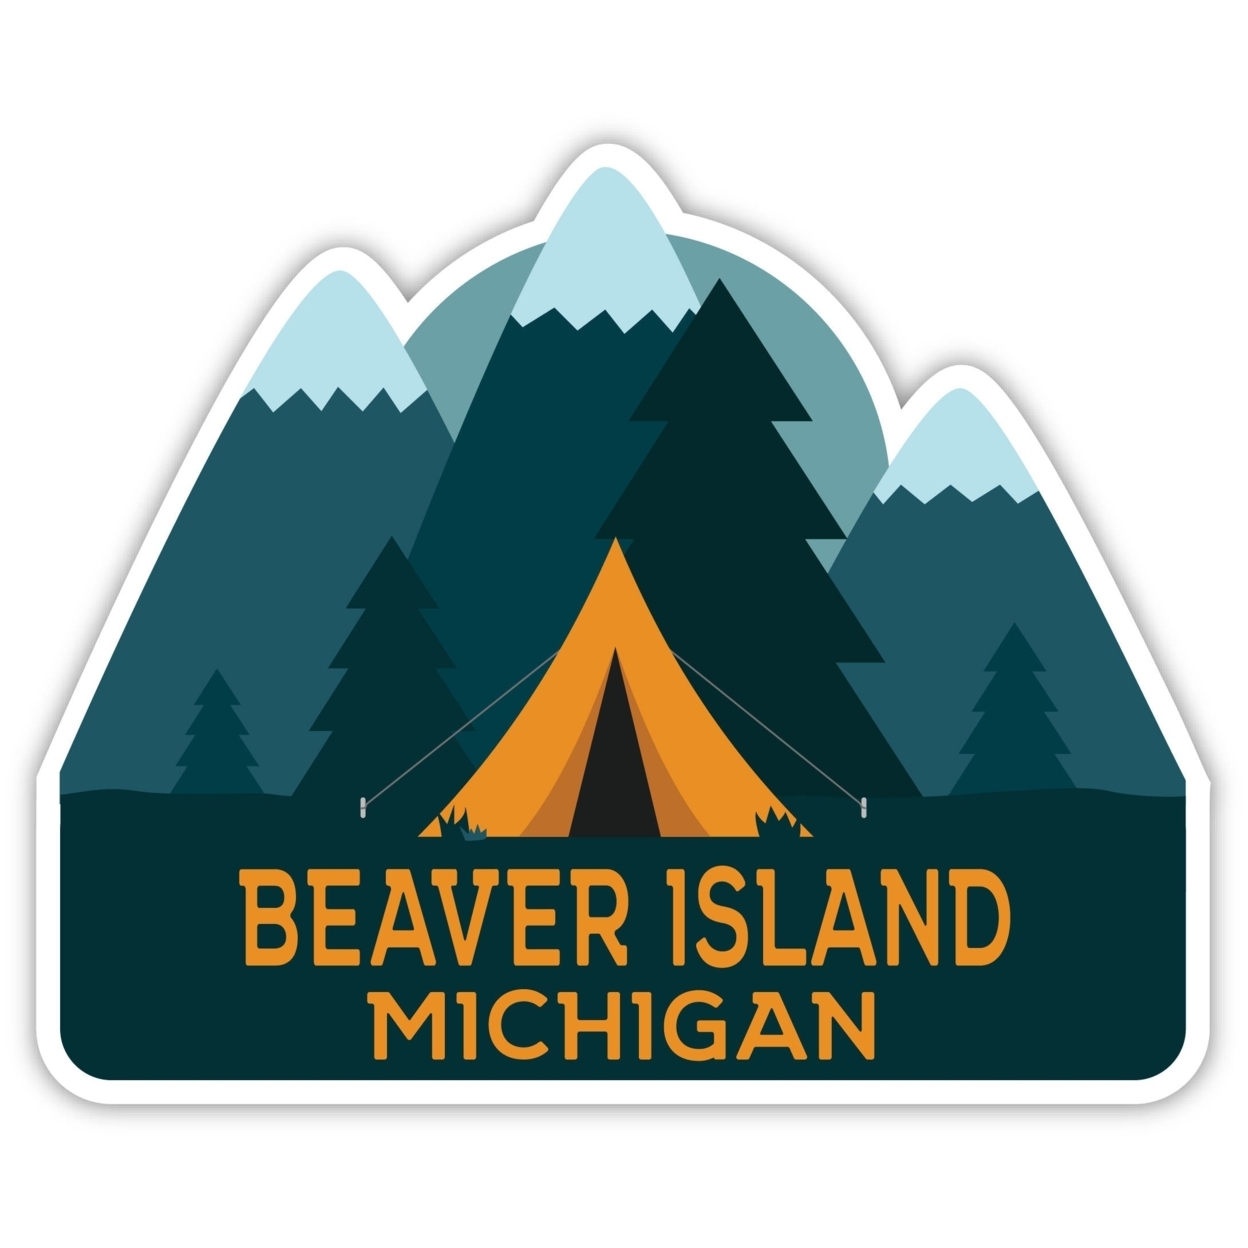 Beaver Island Michigan Souvenir Decorative Stickers (Choose Theme And Size) - 4-Pack, 12-Inch, Tent